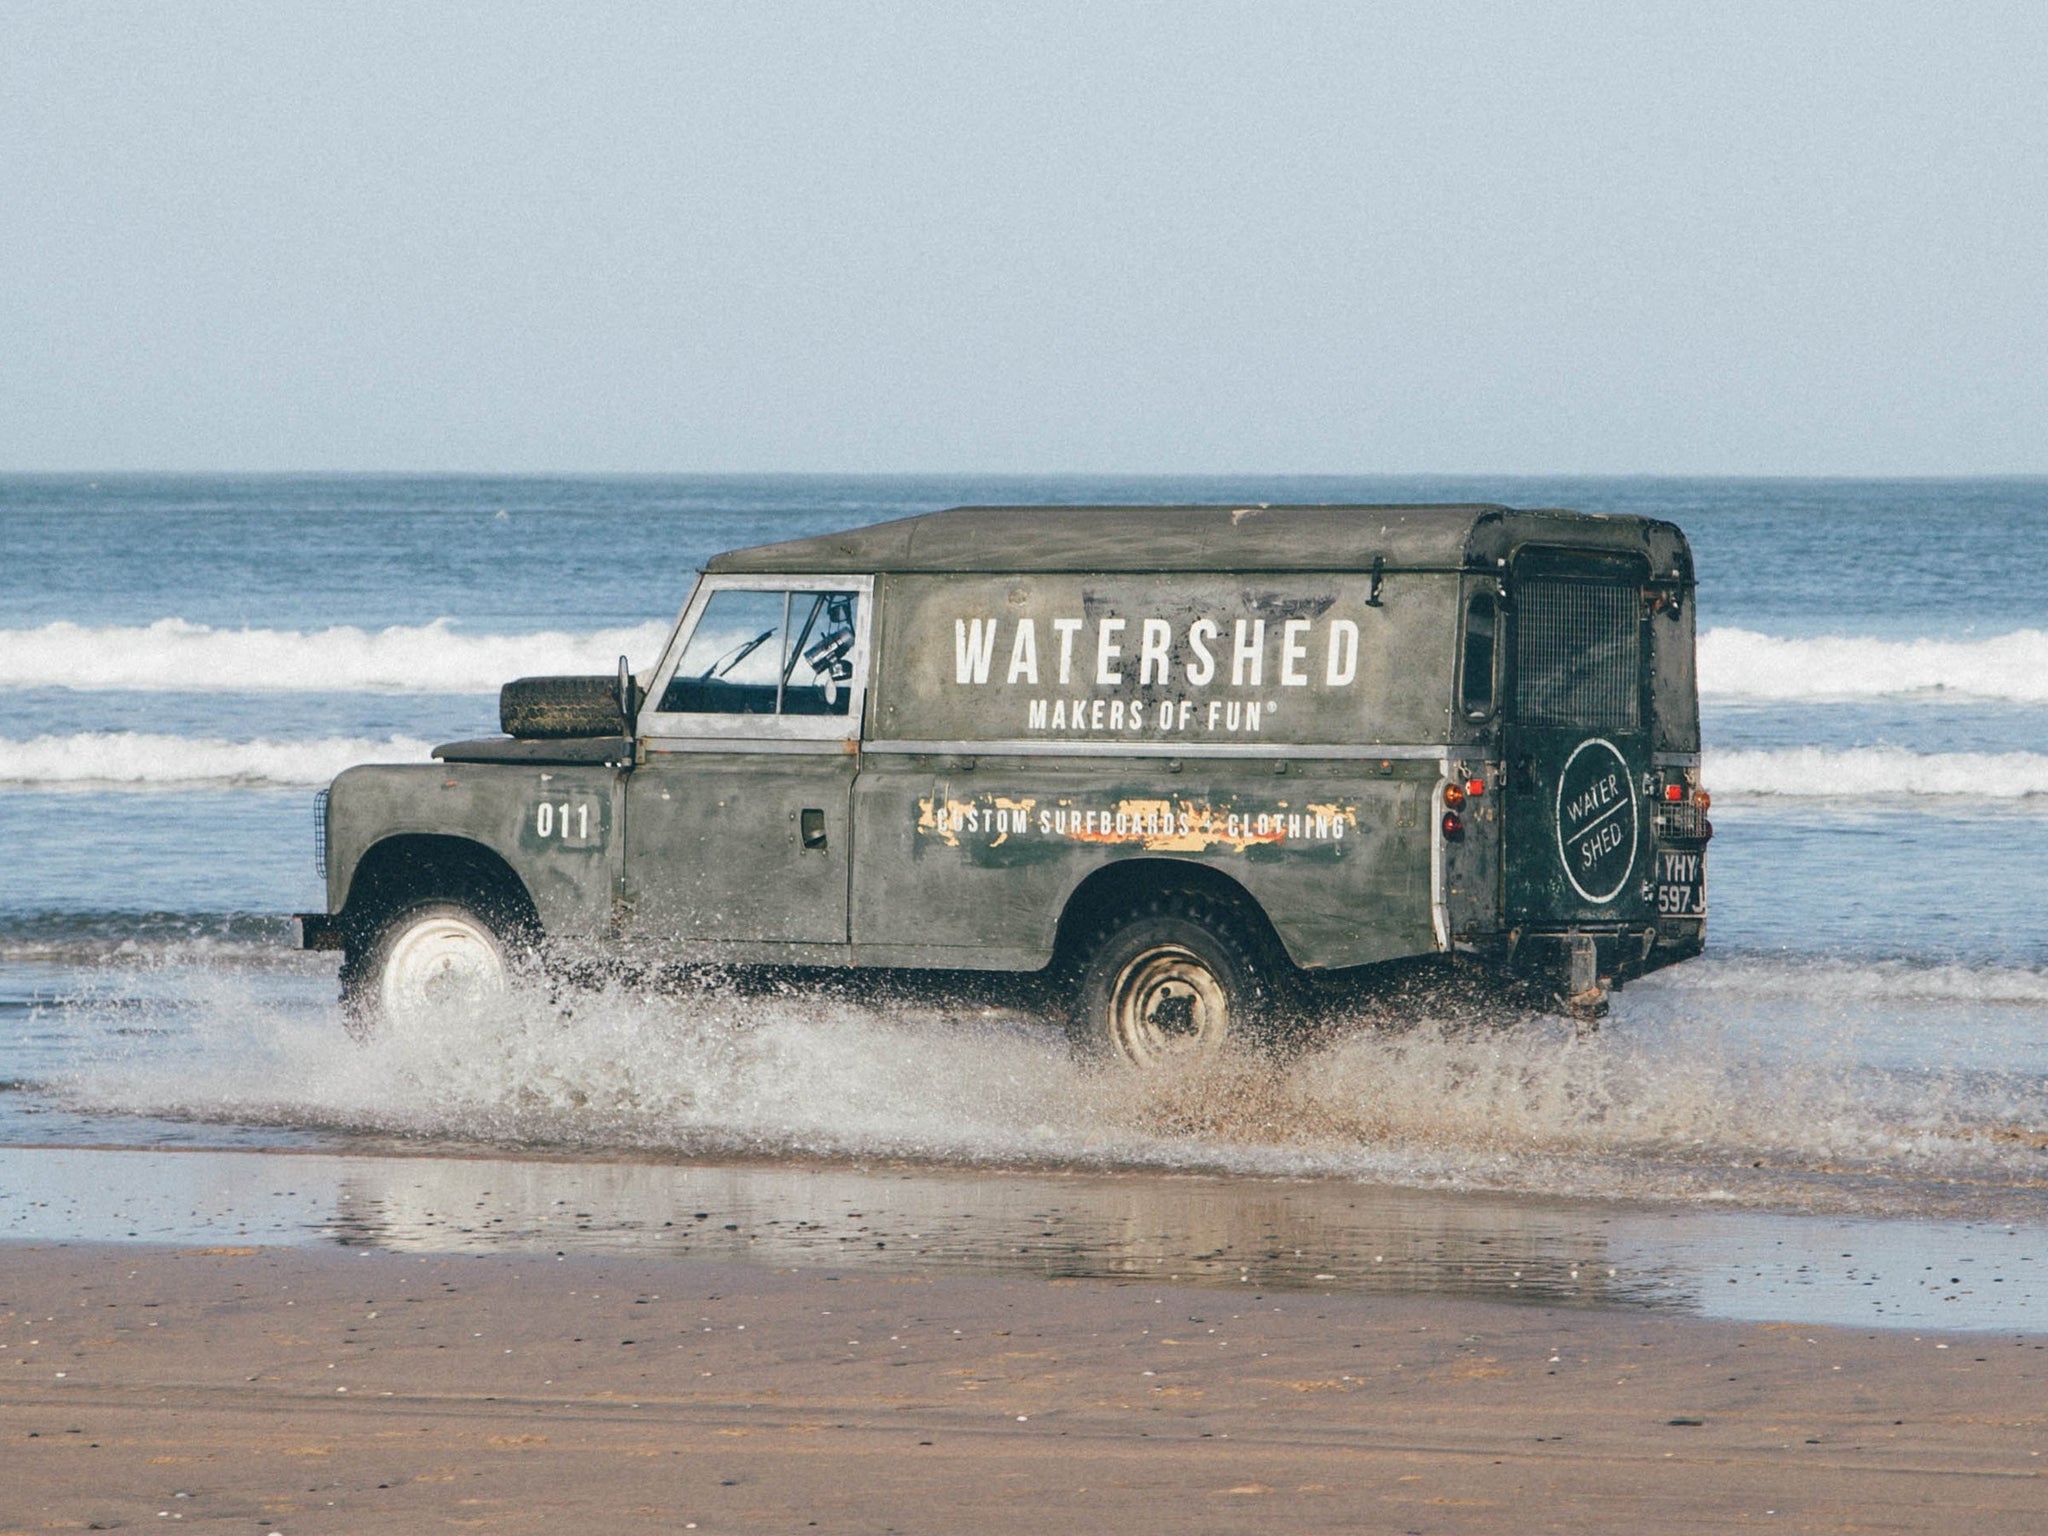 The Vintage Iconic cars of Watershed - Watershed Brand